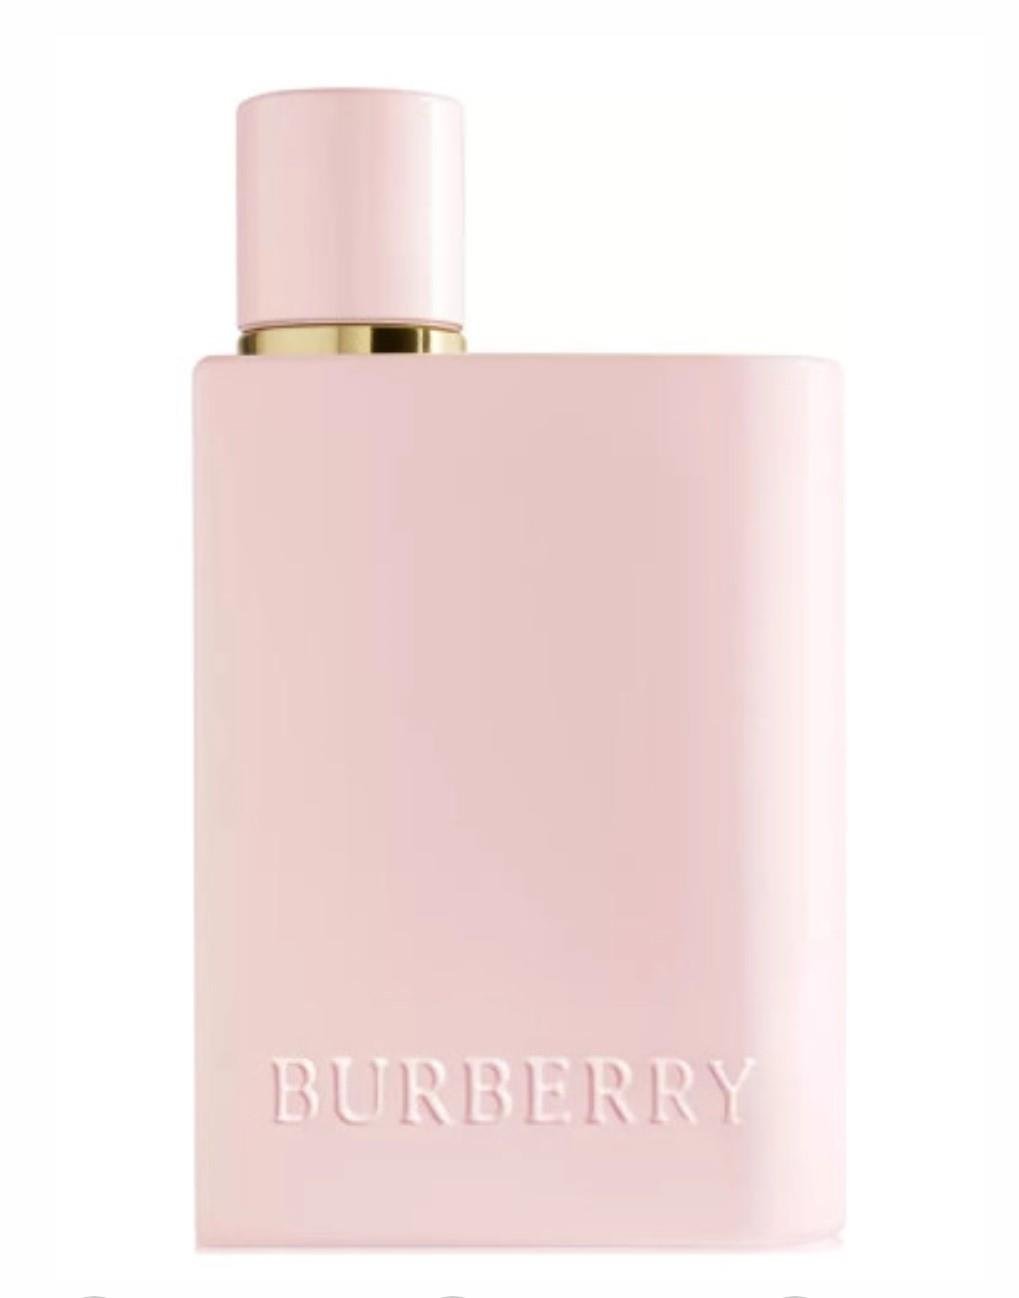 Buy Burberry Her Elixir EdP - Decanted Fragrances and Perfume